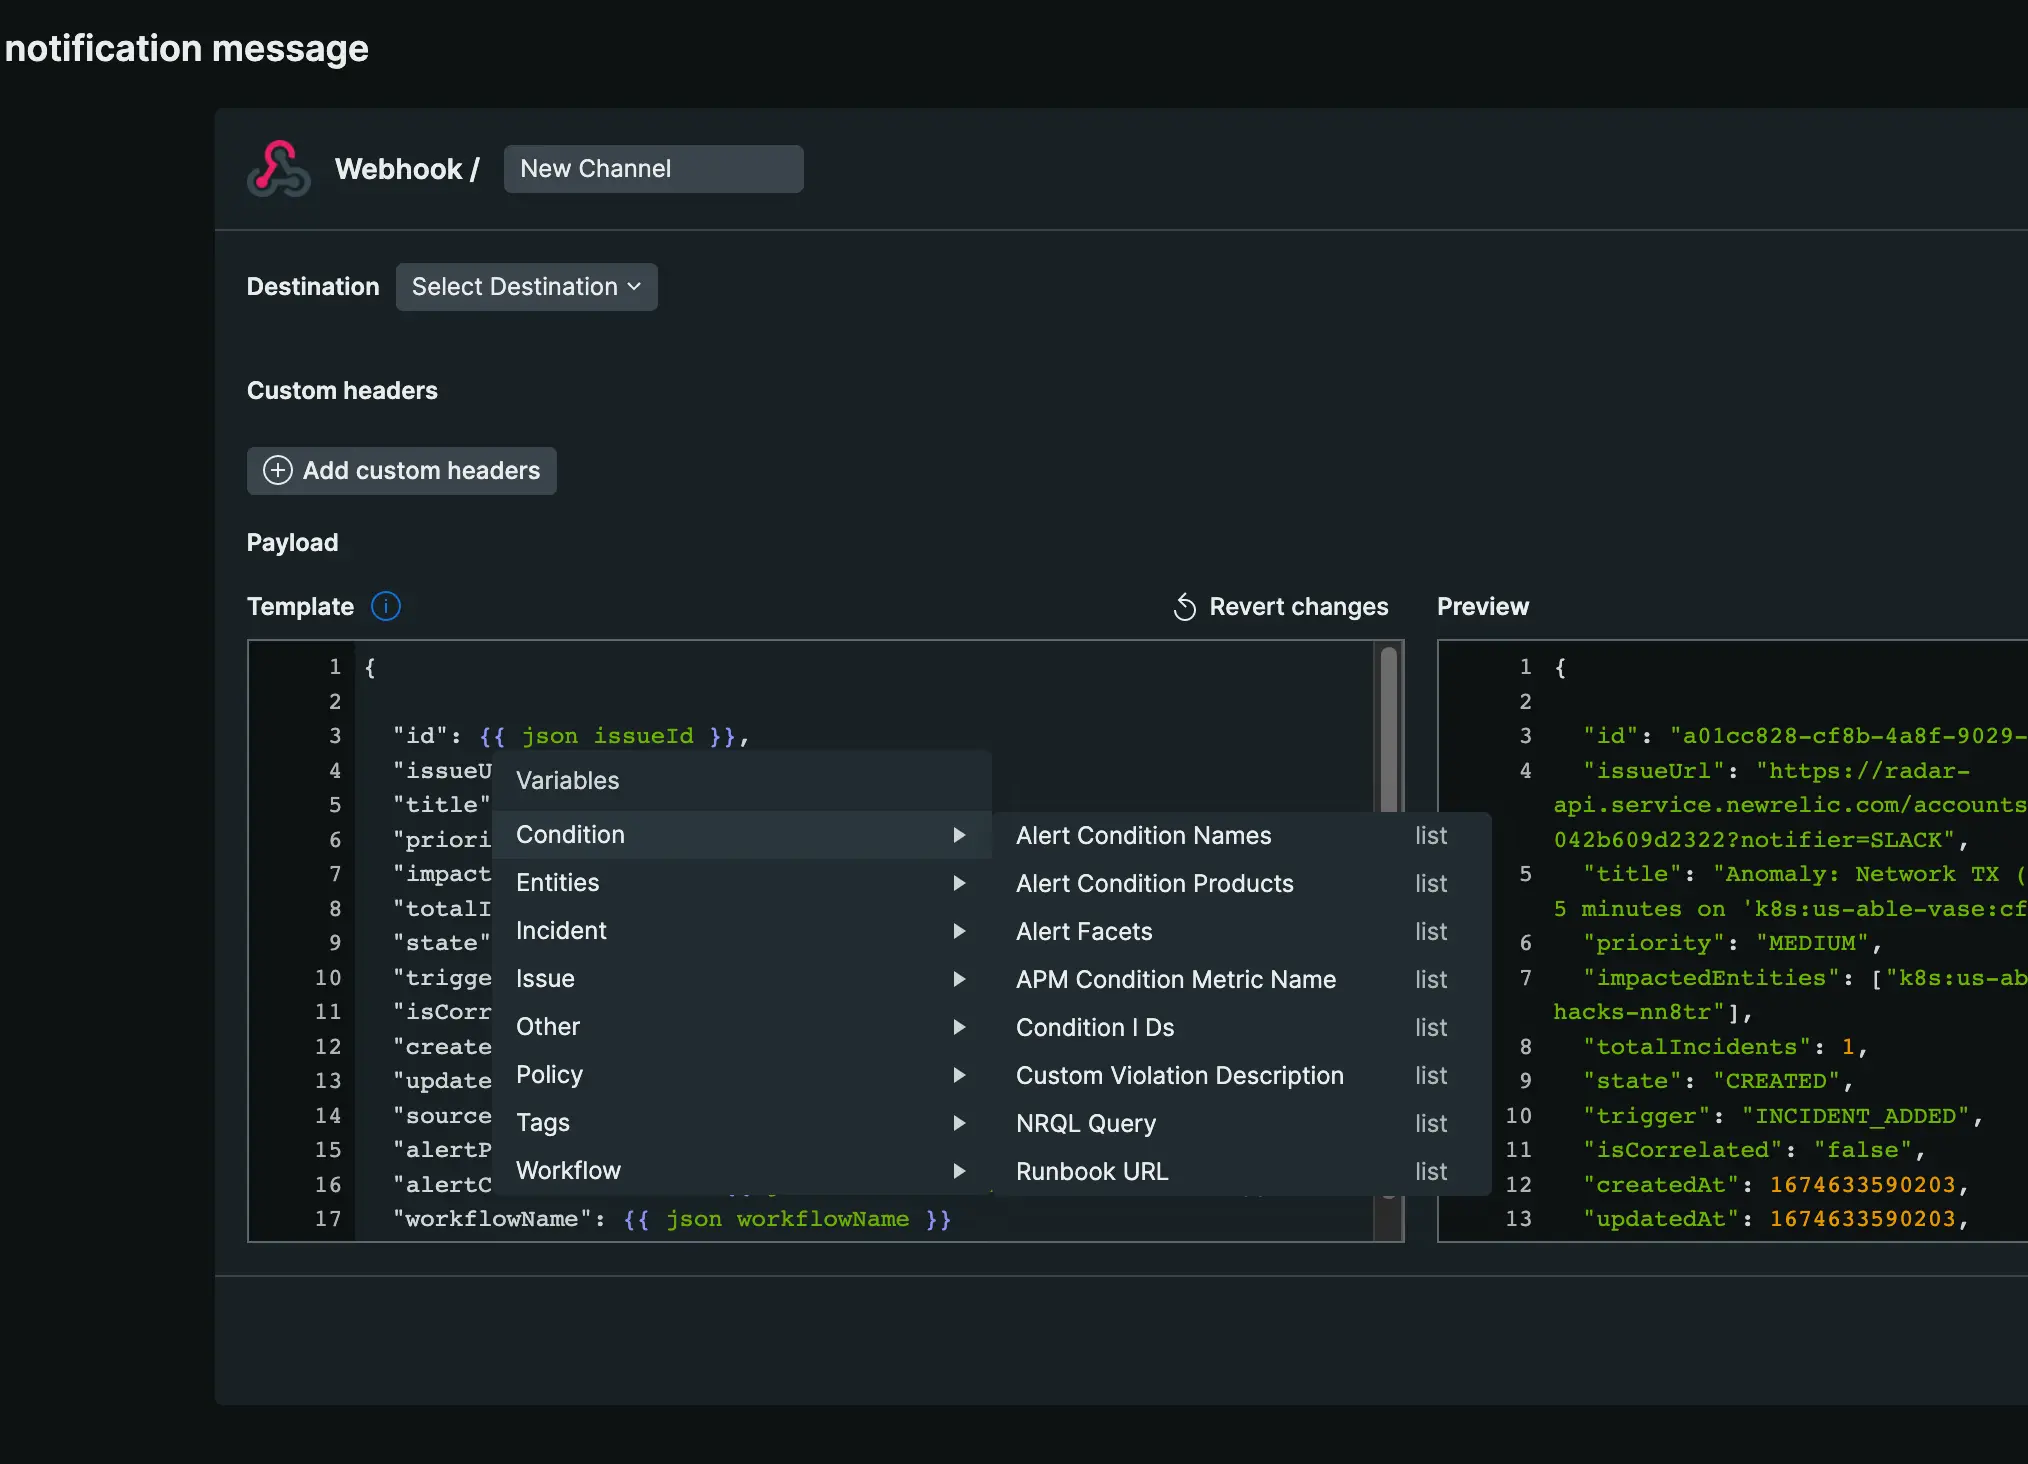 A screenshot of the variables menu that. shows the breadth of variable options available.